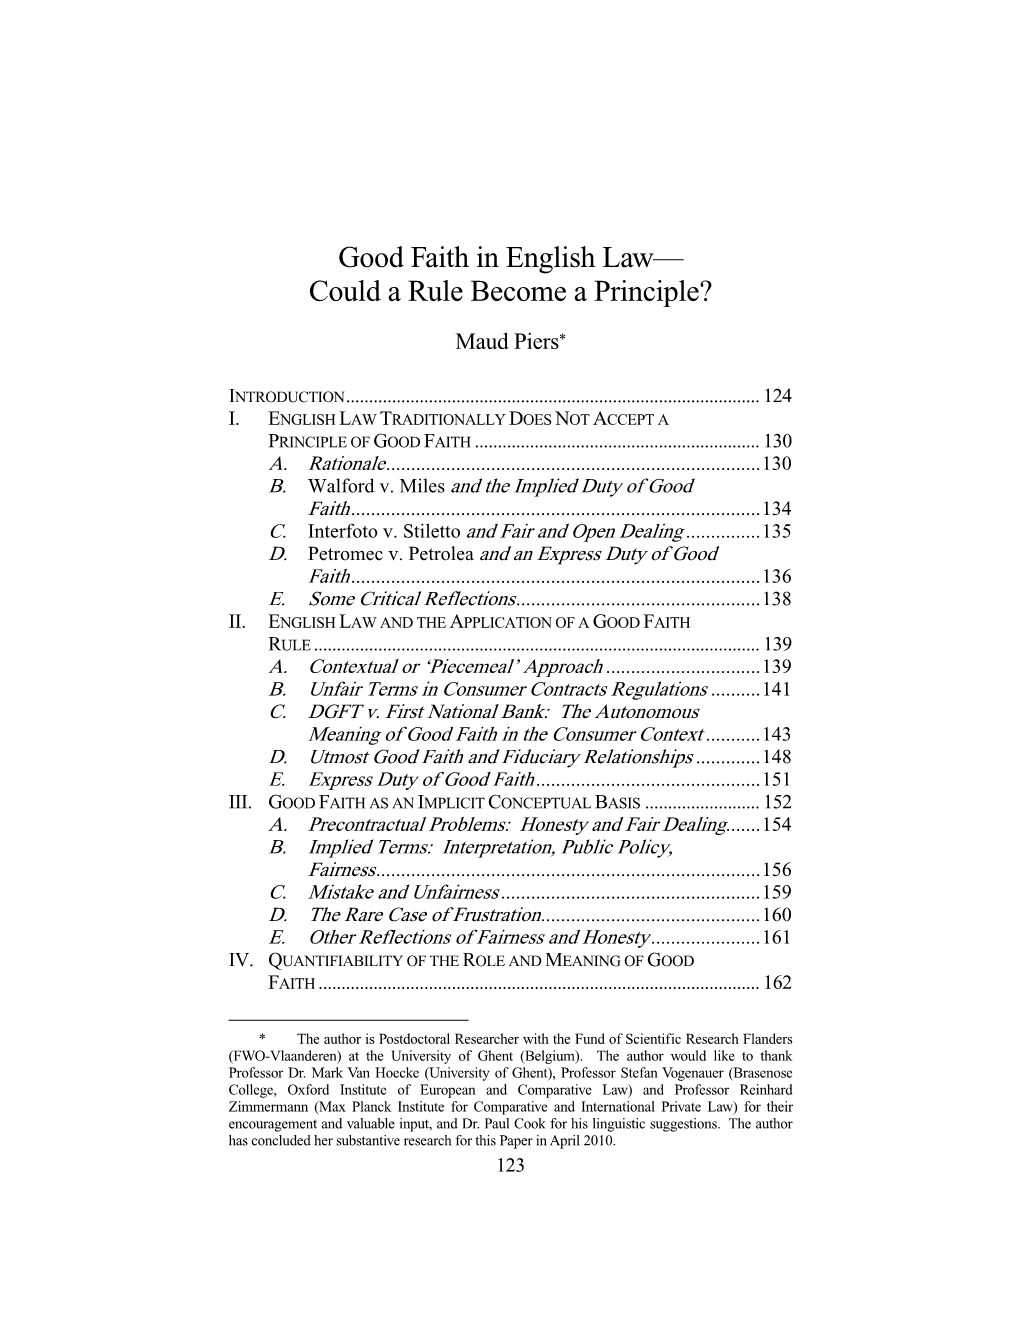 Good Faith in English Law— Could a Rule Become a Principle?